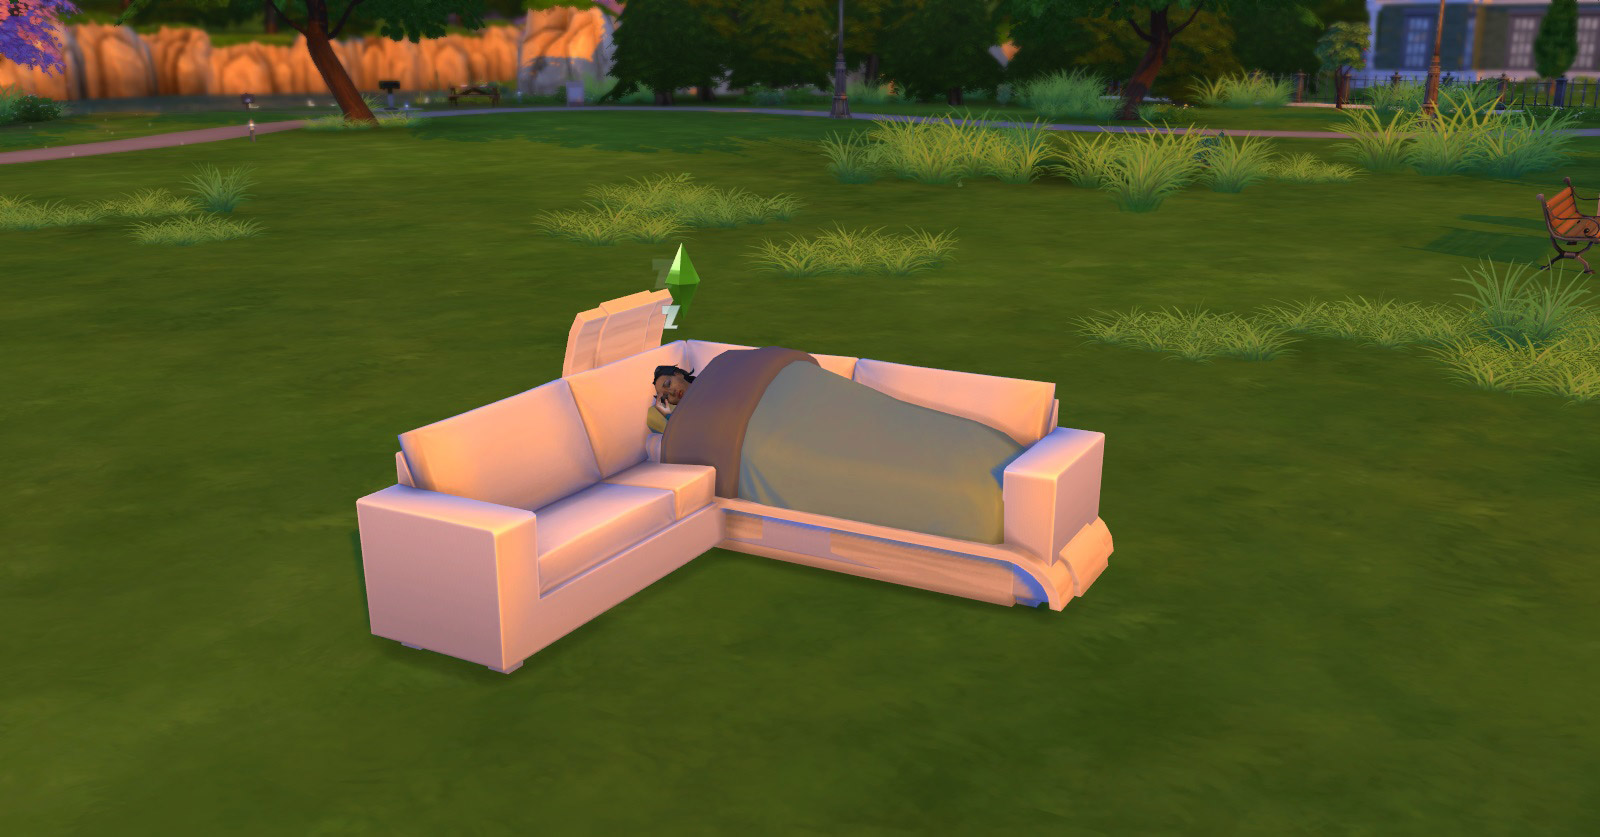 Sims 4 Move Objects On, Move Objects On = MOO